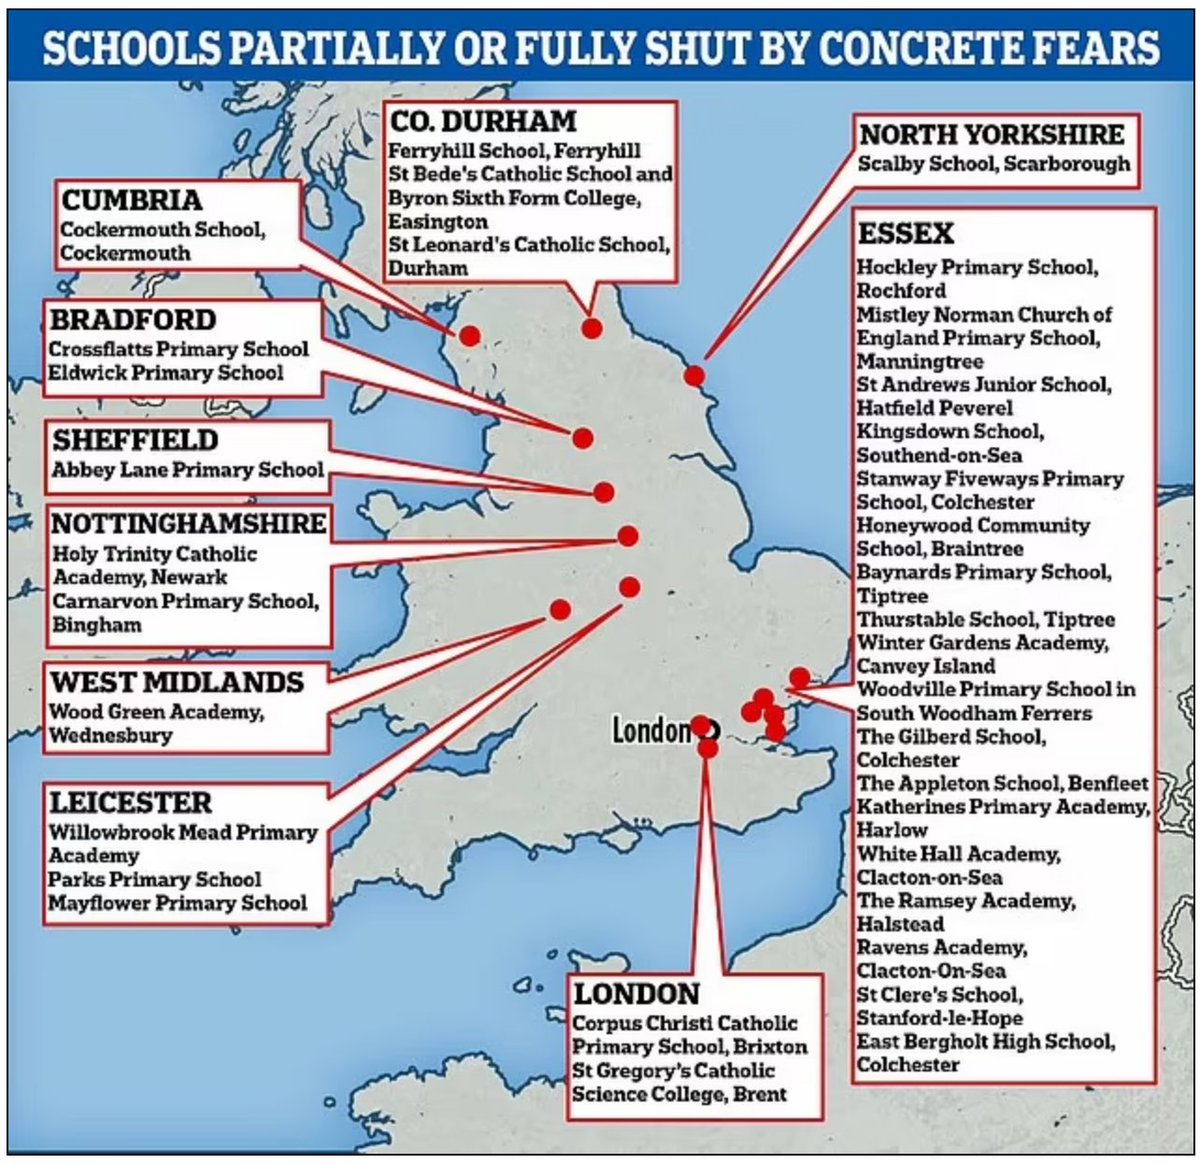 Huge impact shown here in the Conservative heartlands of Essex by The Daily Fail.
Not good news for a government preparing for an election. 
#ToriesOut423 #RAAC #SchoolSafety #SchoolClosures #ToriesDestroyingOurCountry